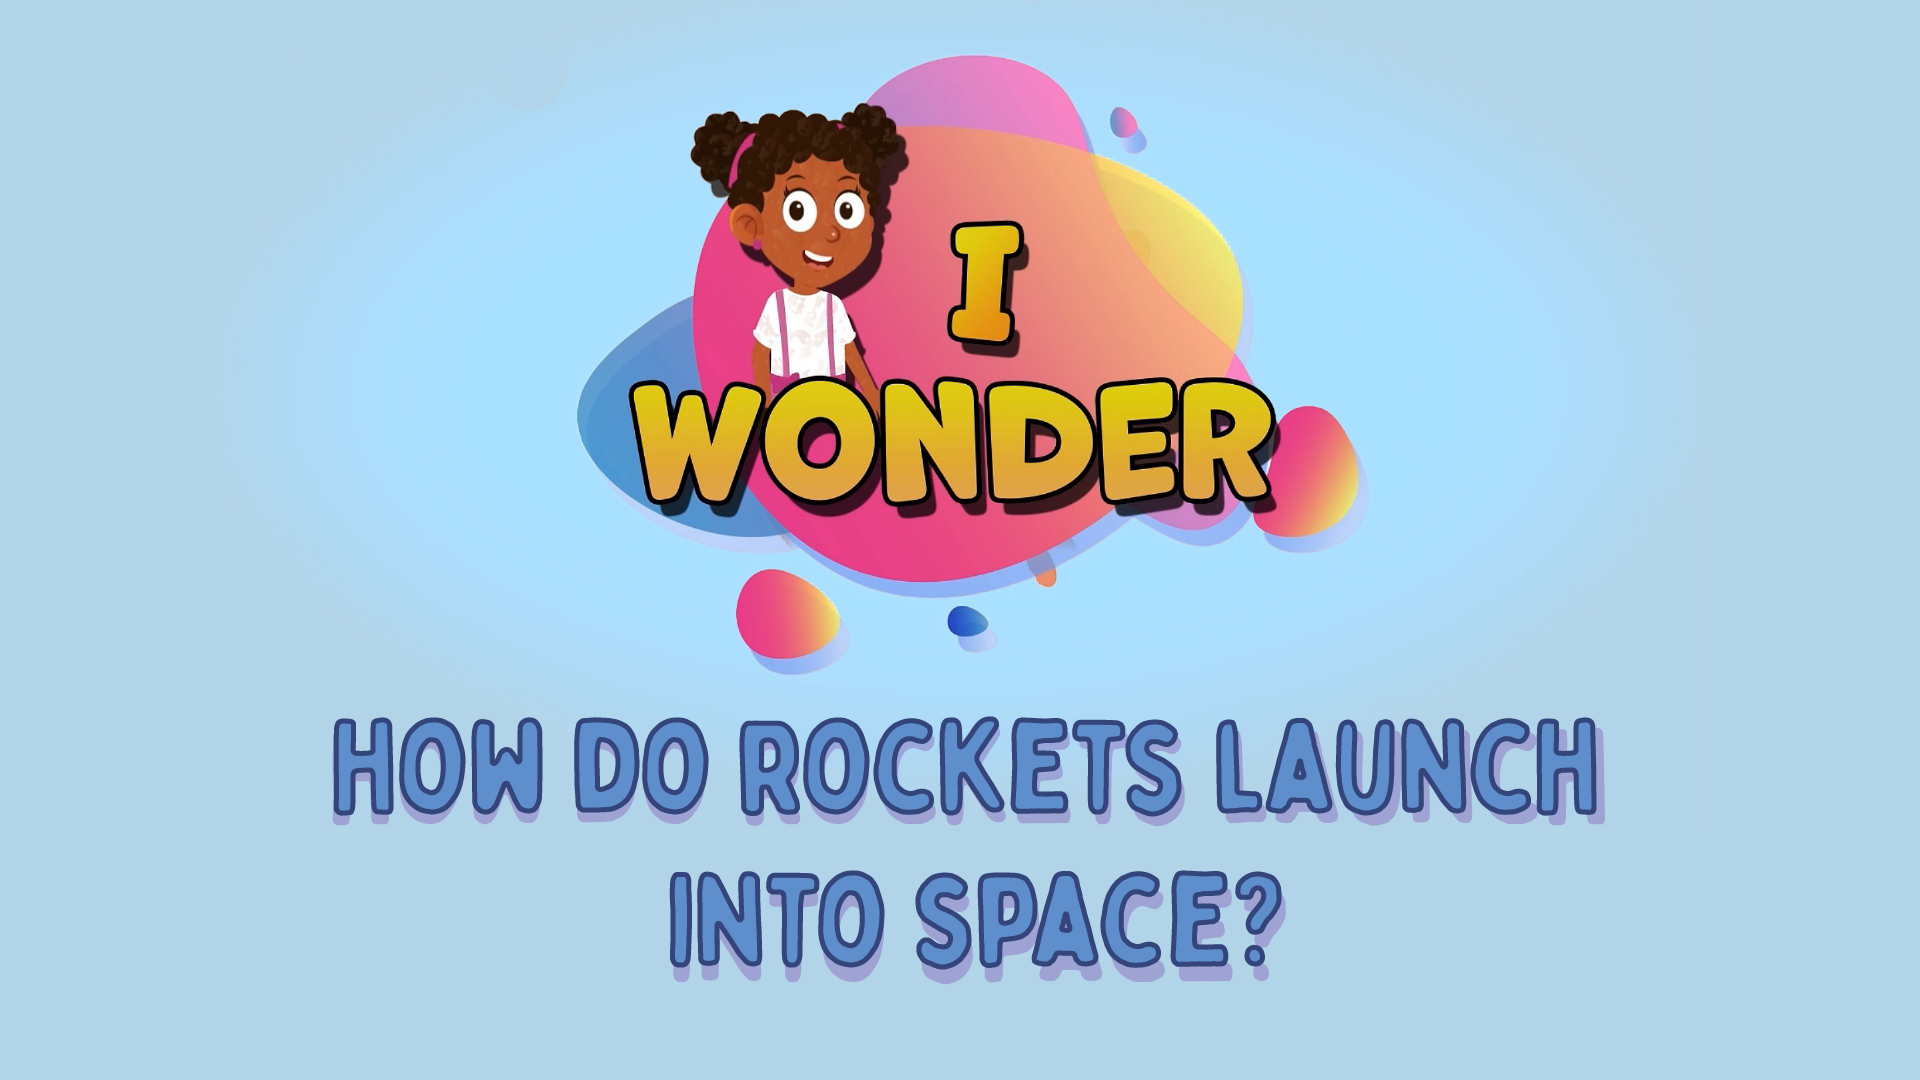 How Do Rockets Launch Into Space?